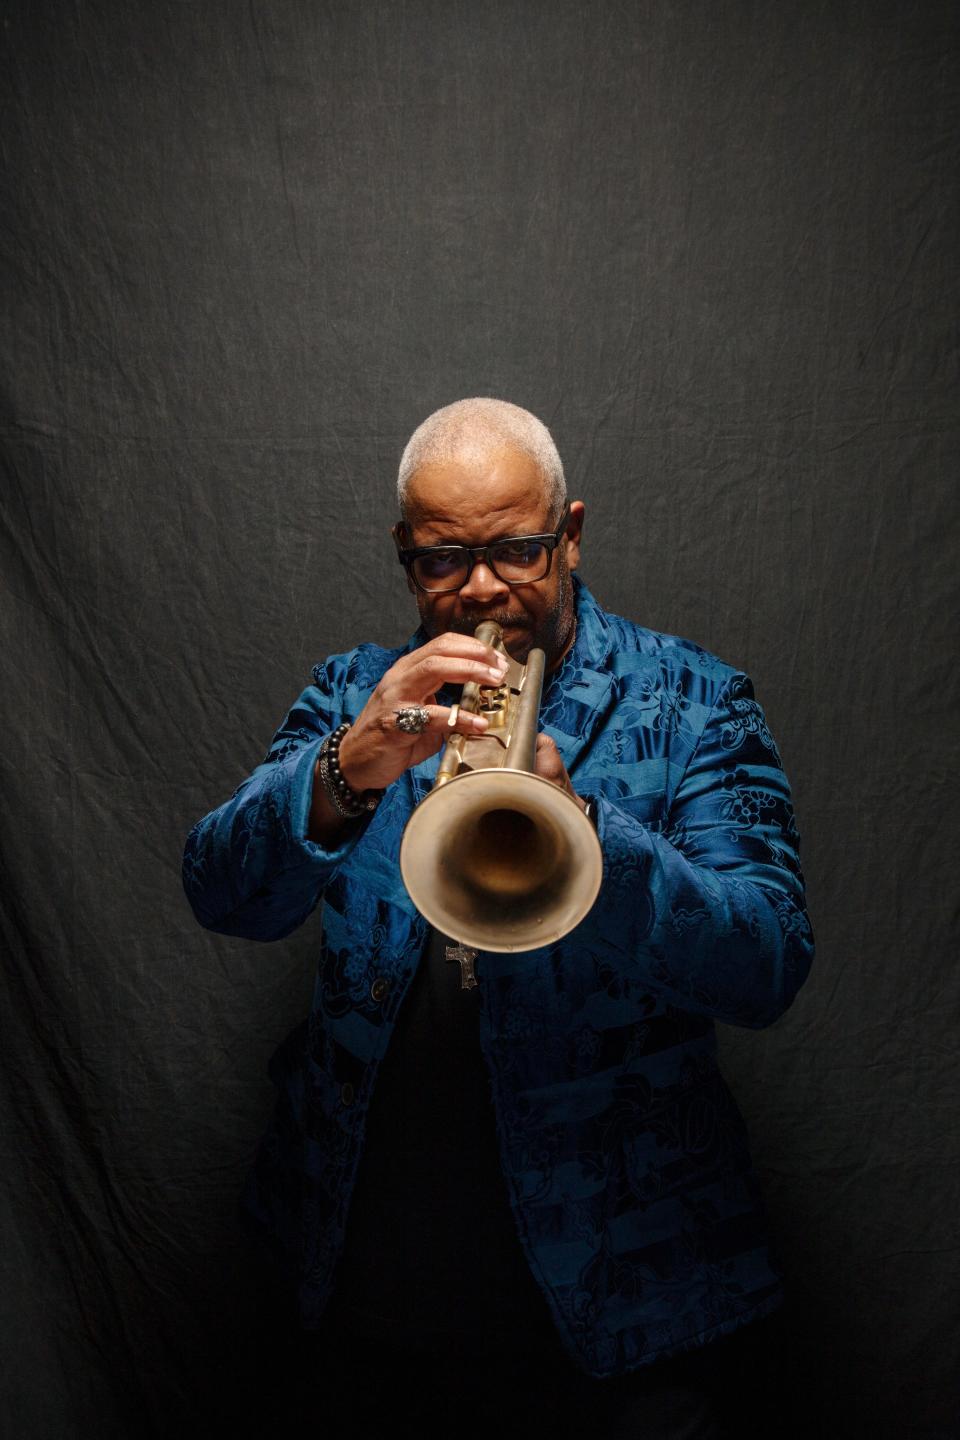 Trumpeter and composer Terence Blanchard will perform at The Music Hall in Portsmouth on Sunday, Nov. 14.